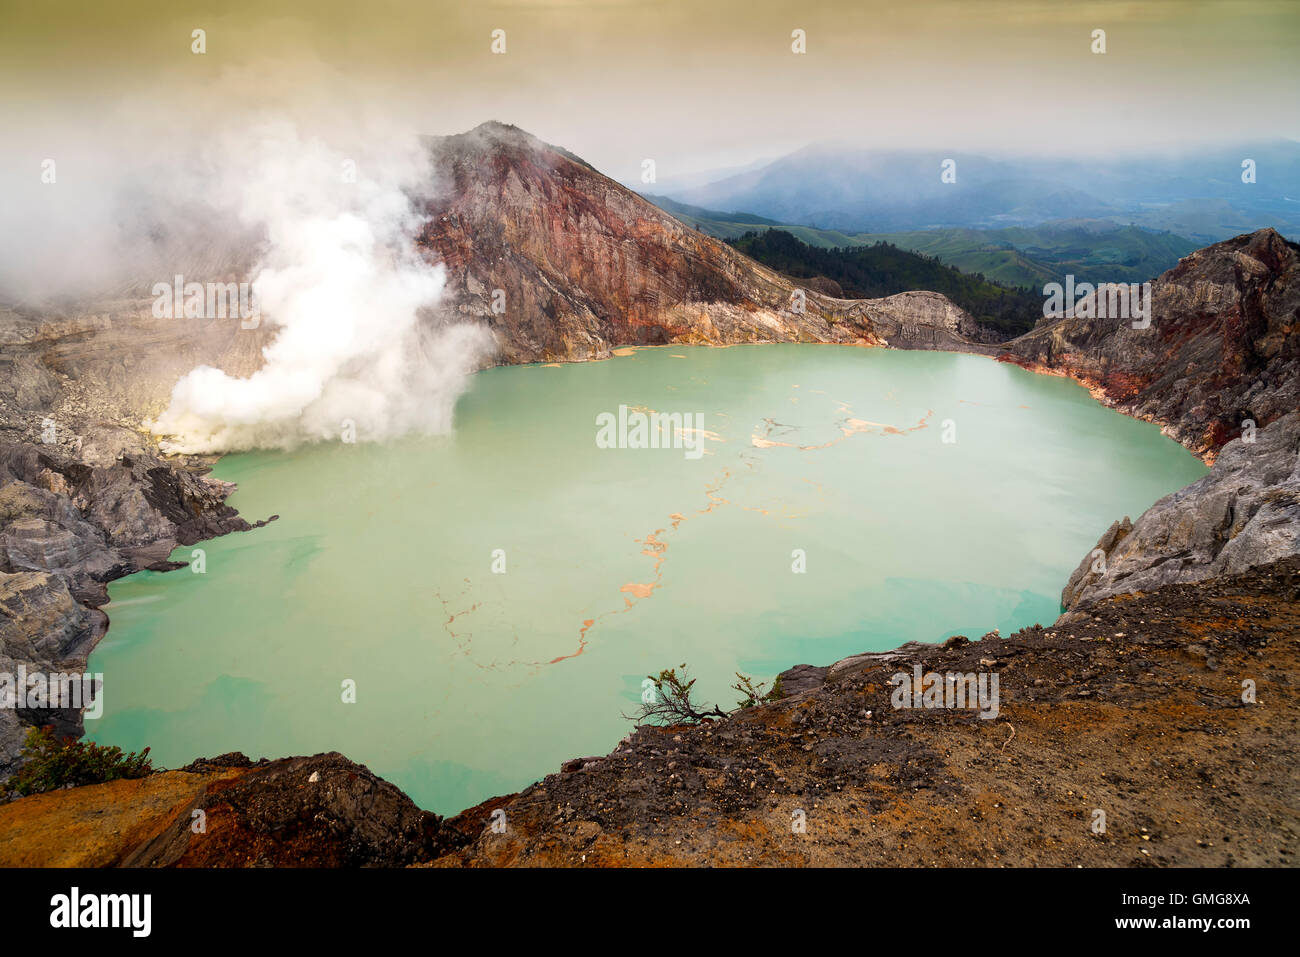 Night visitors at Ijen Volcano and Crater, Java, Indonesia Stock Photo